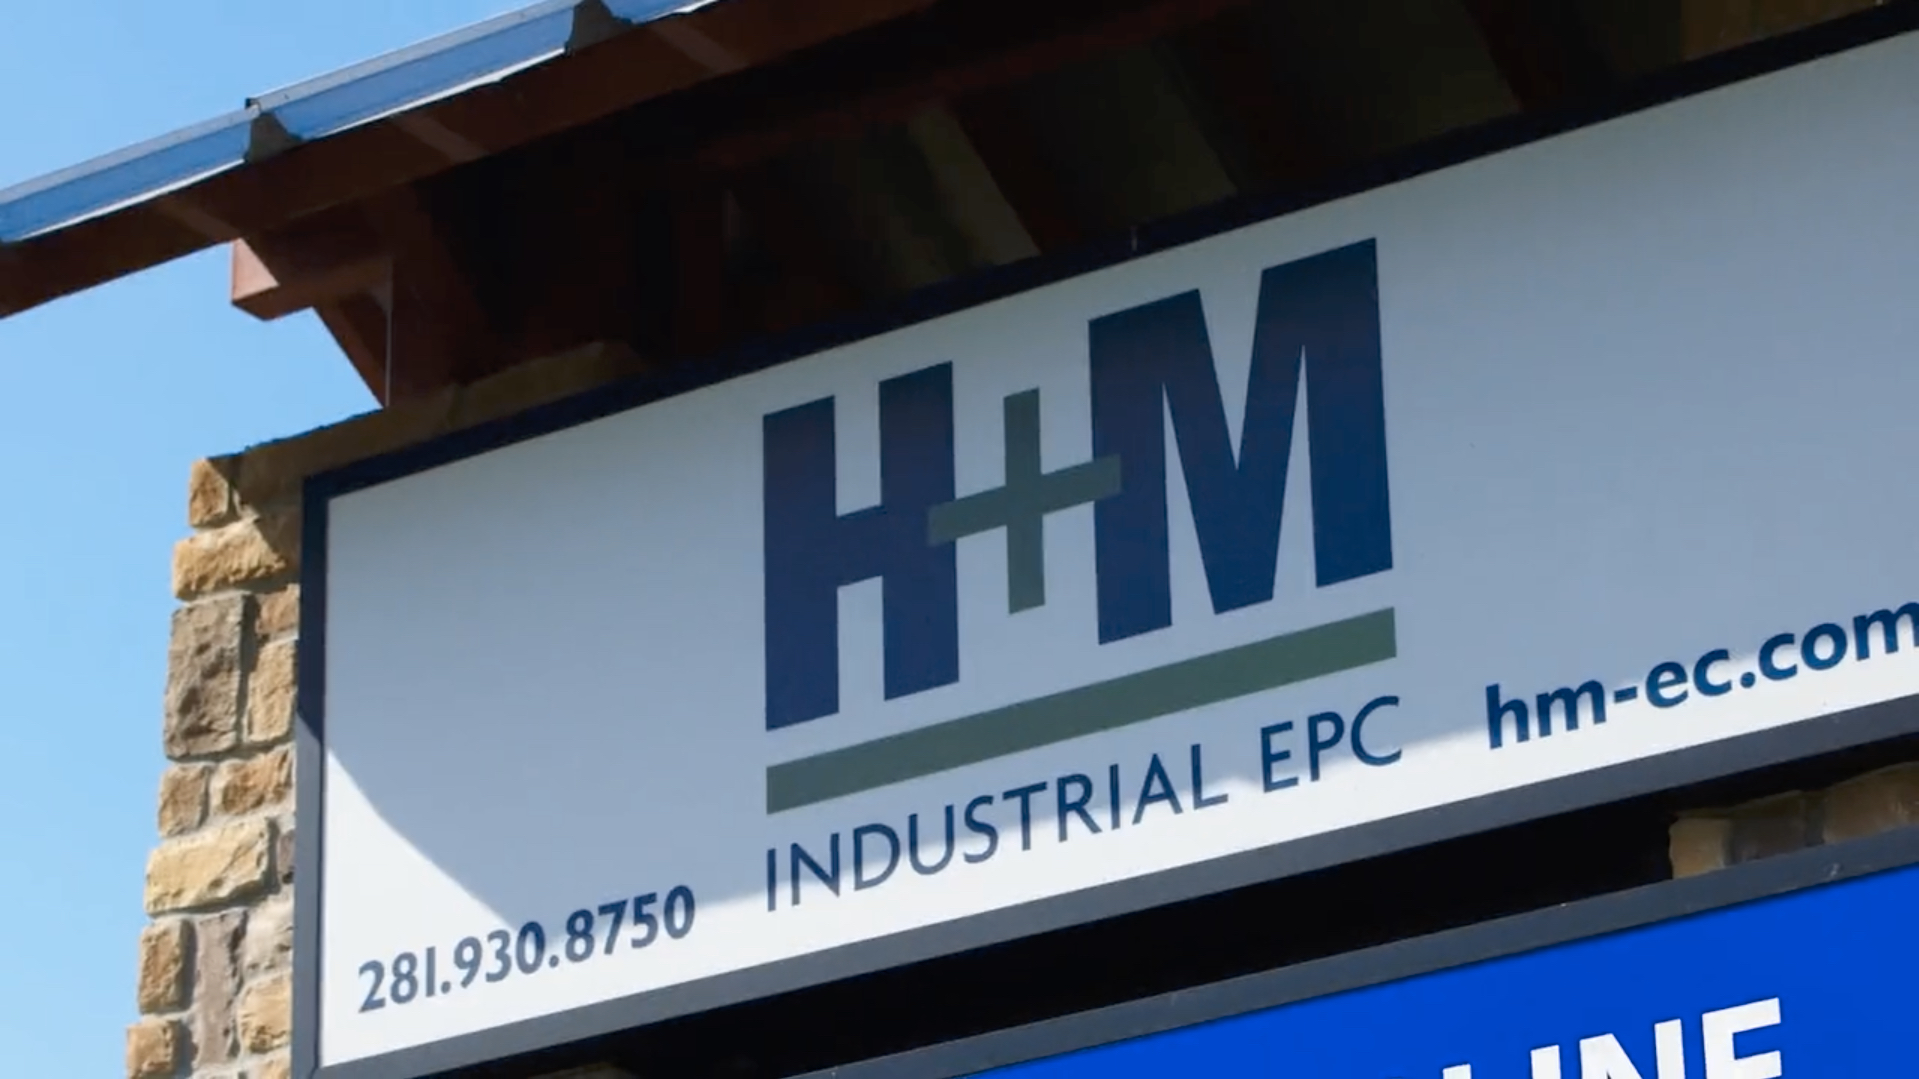 H+M Industrial EPC video production